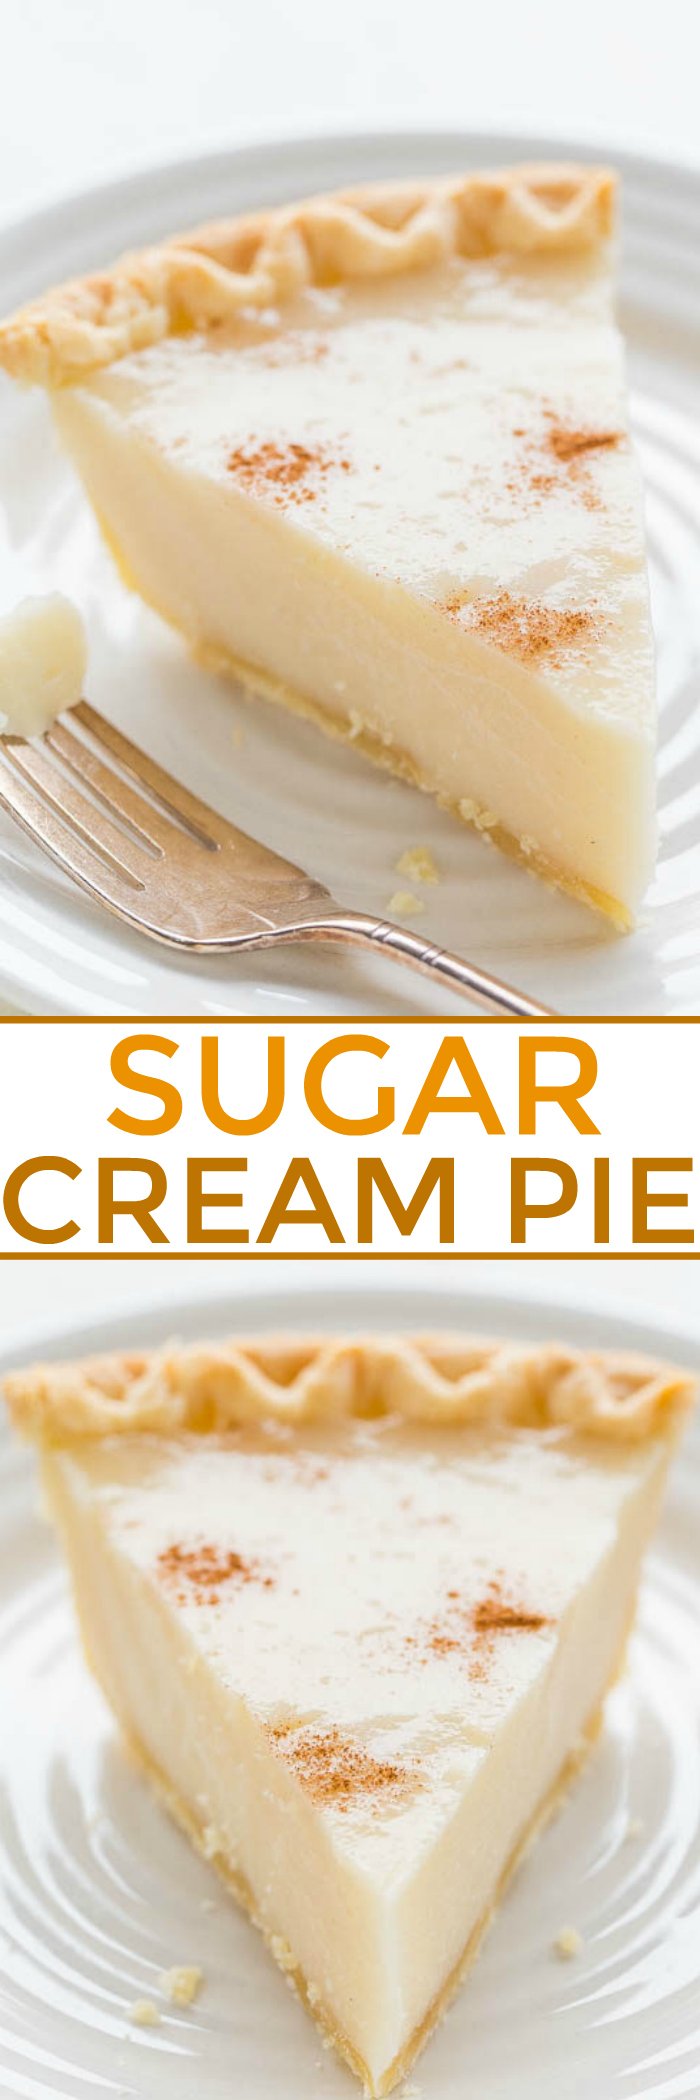 Sugar Cream Pie - An EASY, no mixer cream pie that's guaranteed to set up!! Sweet, rich, creamy, and tastes a lot like the infamous CRACK PIE crossed with CREME BRULEE but it's 1000x easier! Use frozen pie crust to save even more time!!